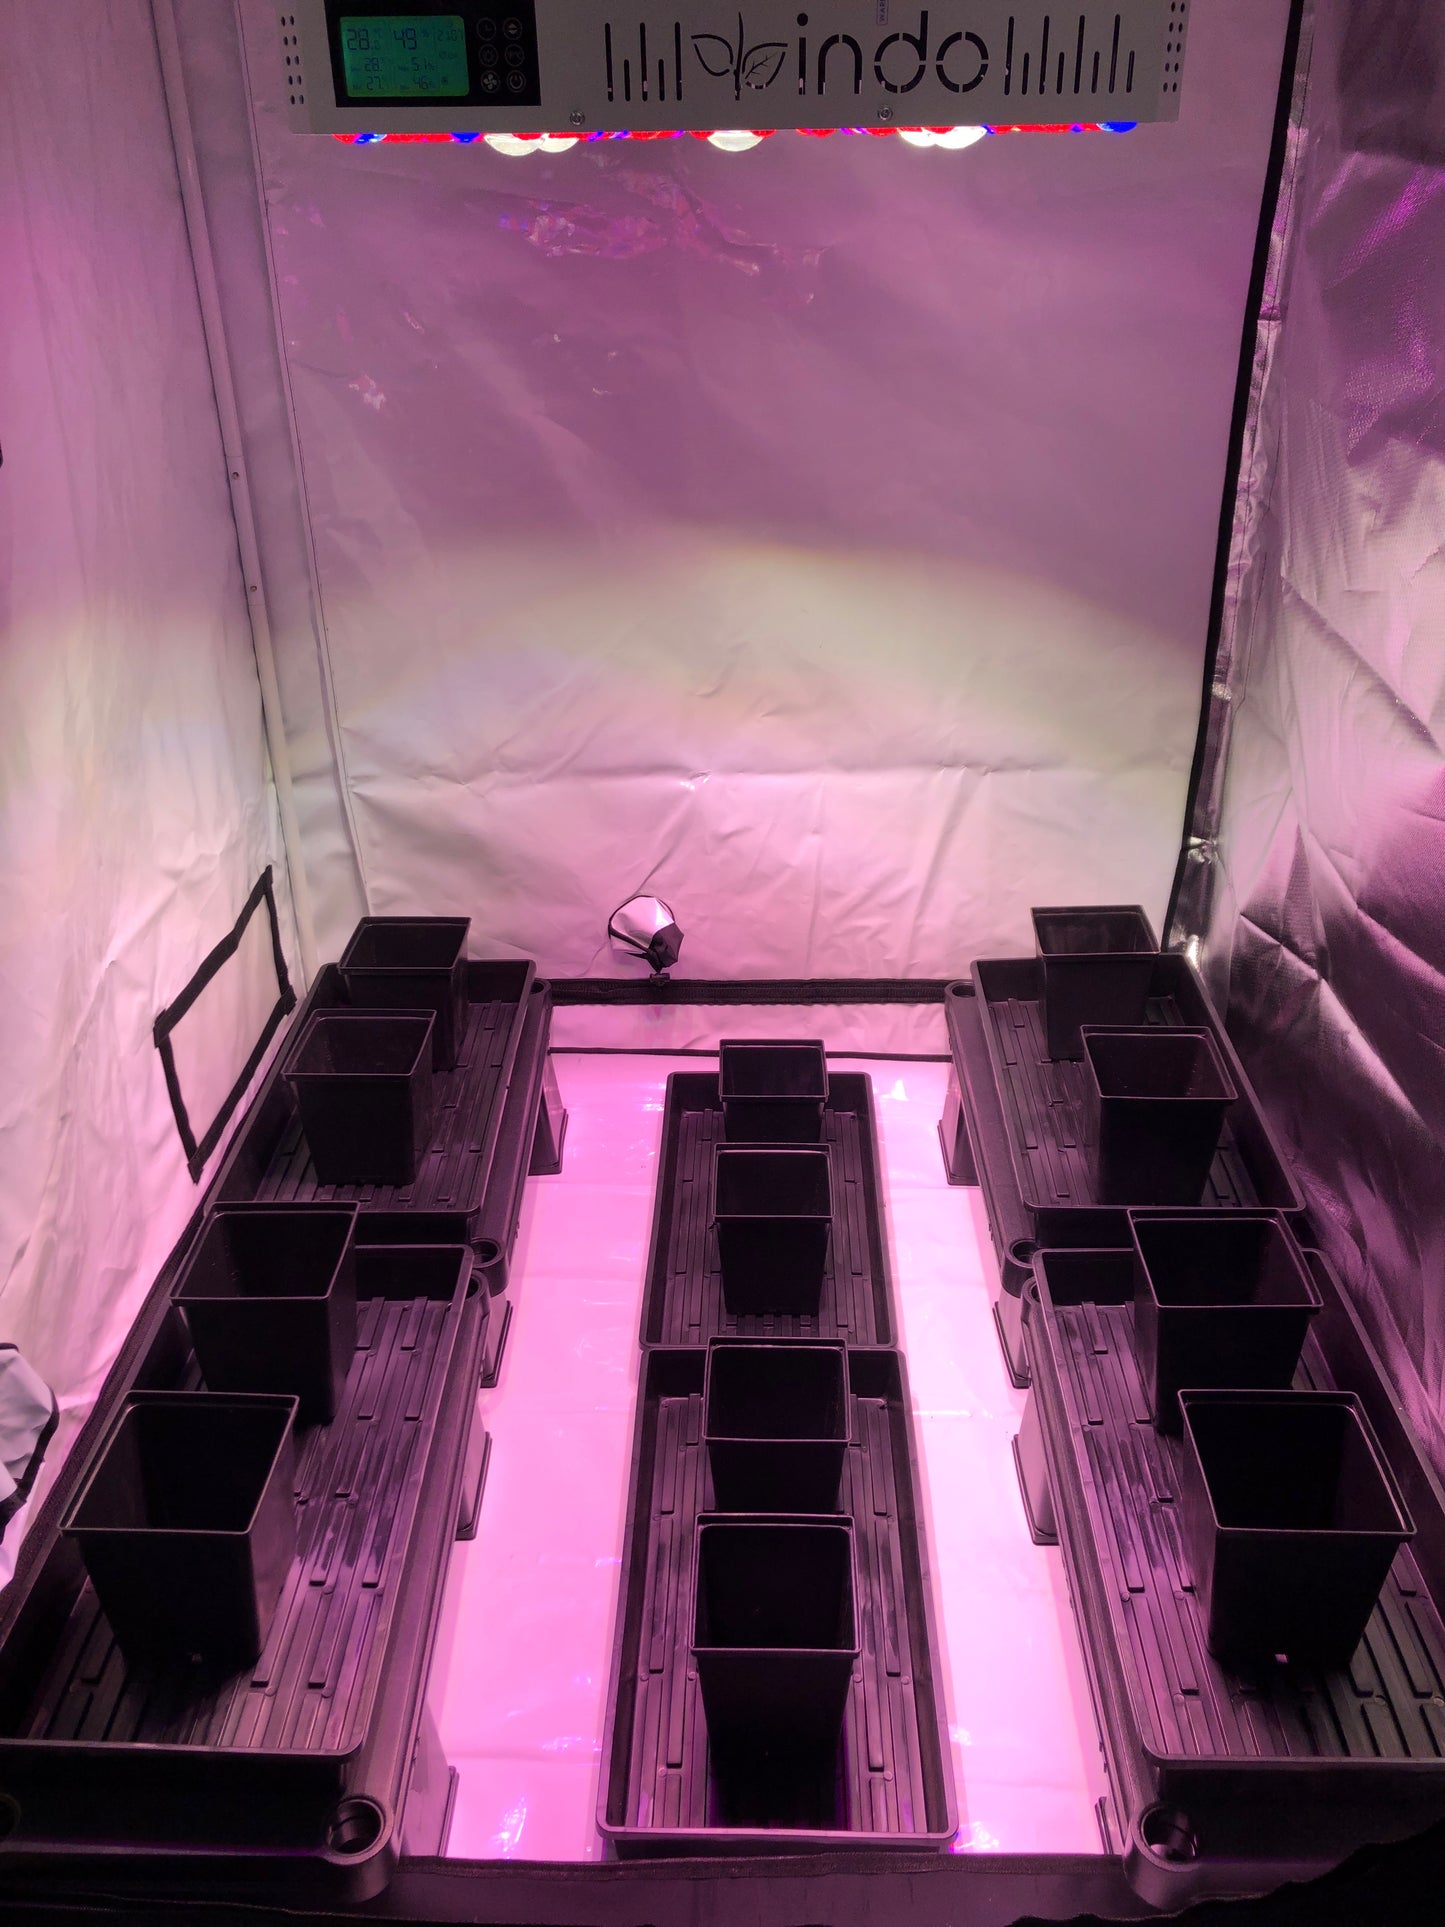 Complete Grow Kit - 48"x48"x80" Grow Tent - 600W GrowHub Light with 6" Fan and Filter Kit